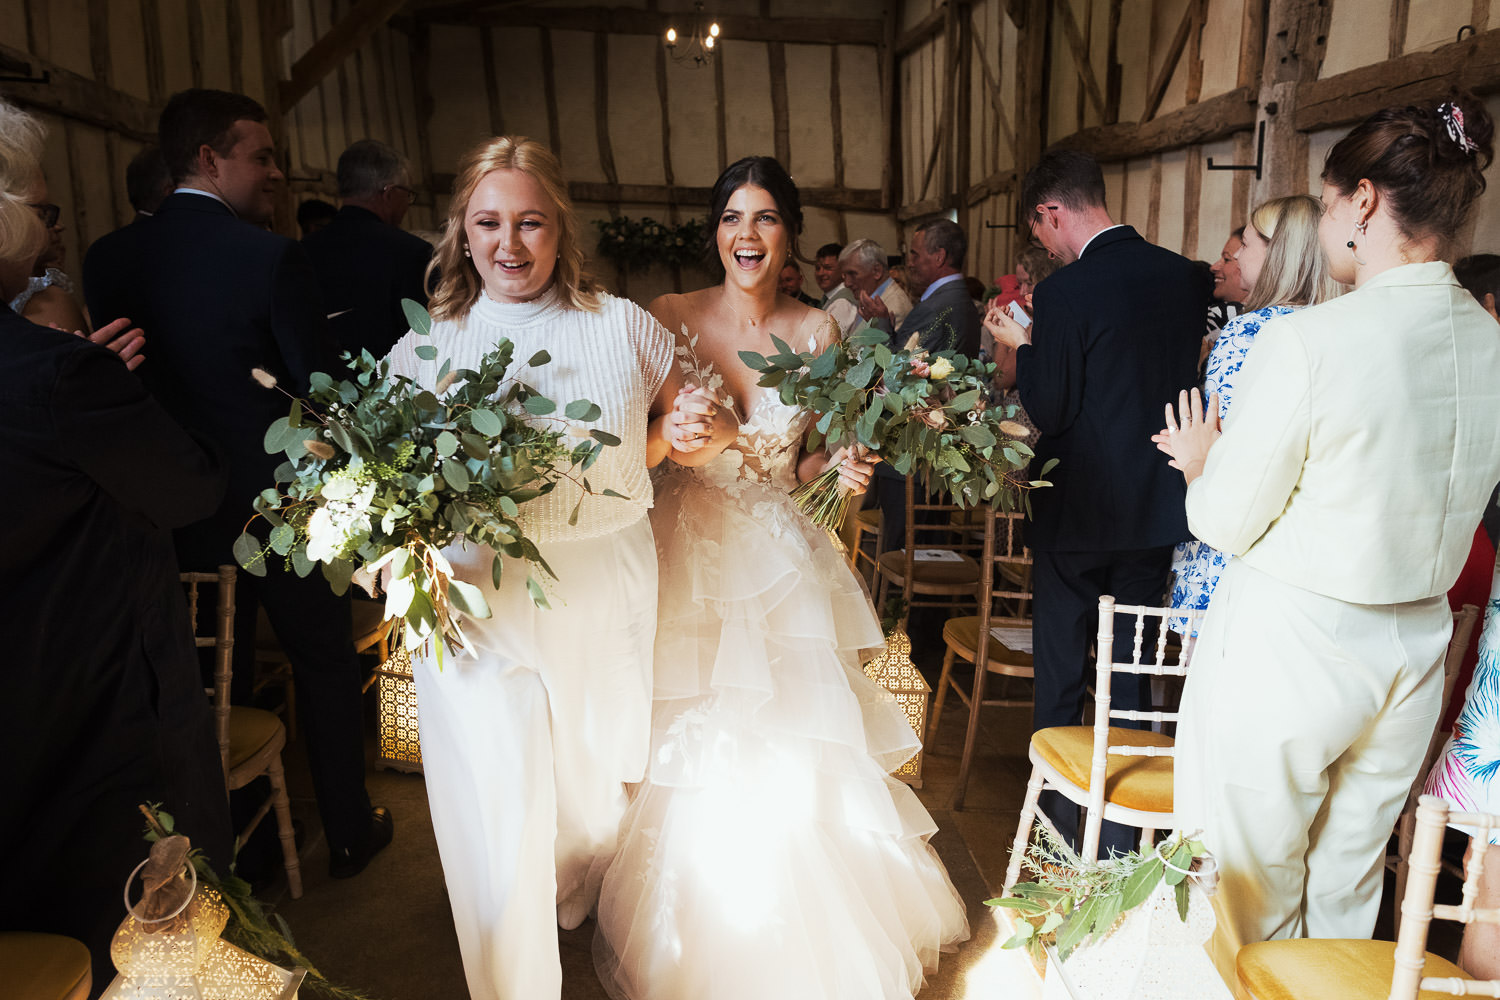 Joyful newlyweds walk down the aisle following their Suffolk Registrar wedding ceremony at Alpheton Hall Barns. One bride wears a WTOO by Watters Montgomery dress (Style #12716), while the other is adorned in a Joanna Hope Beaded Bridal Jumpsuit. Beautiful flowers by Wild + Mae complement the scene.